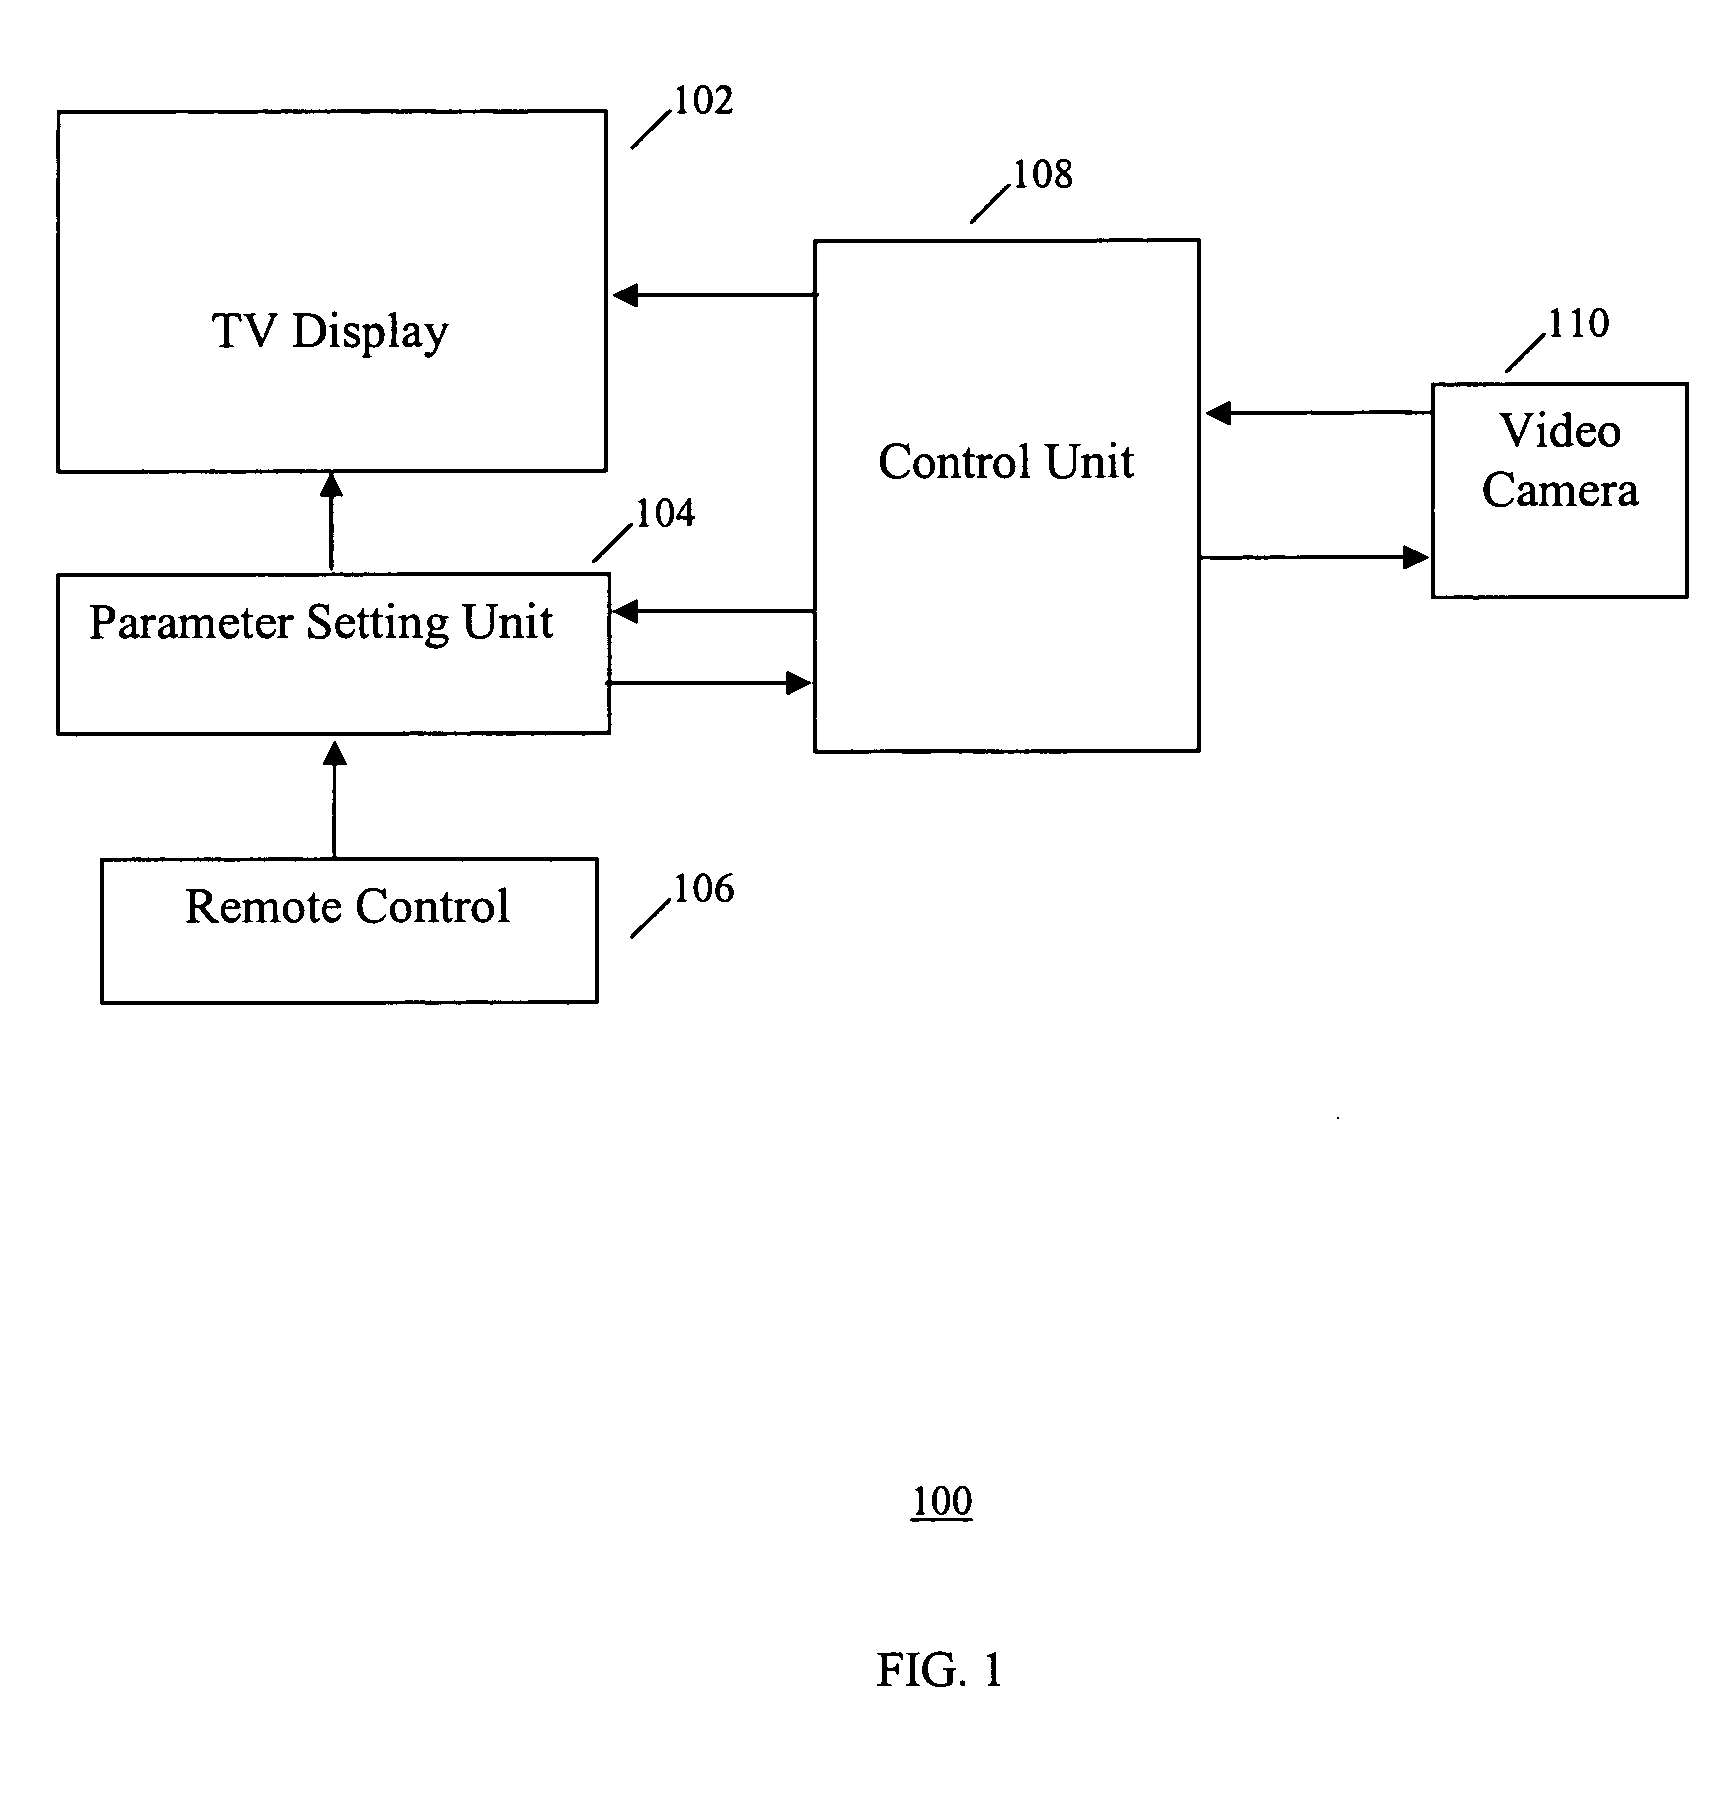 Personal settings, parental control, and energy saving control of television with digital video camera